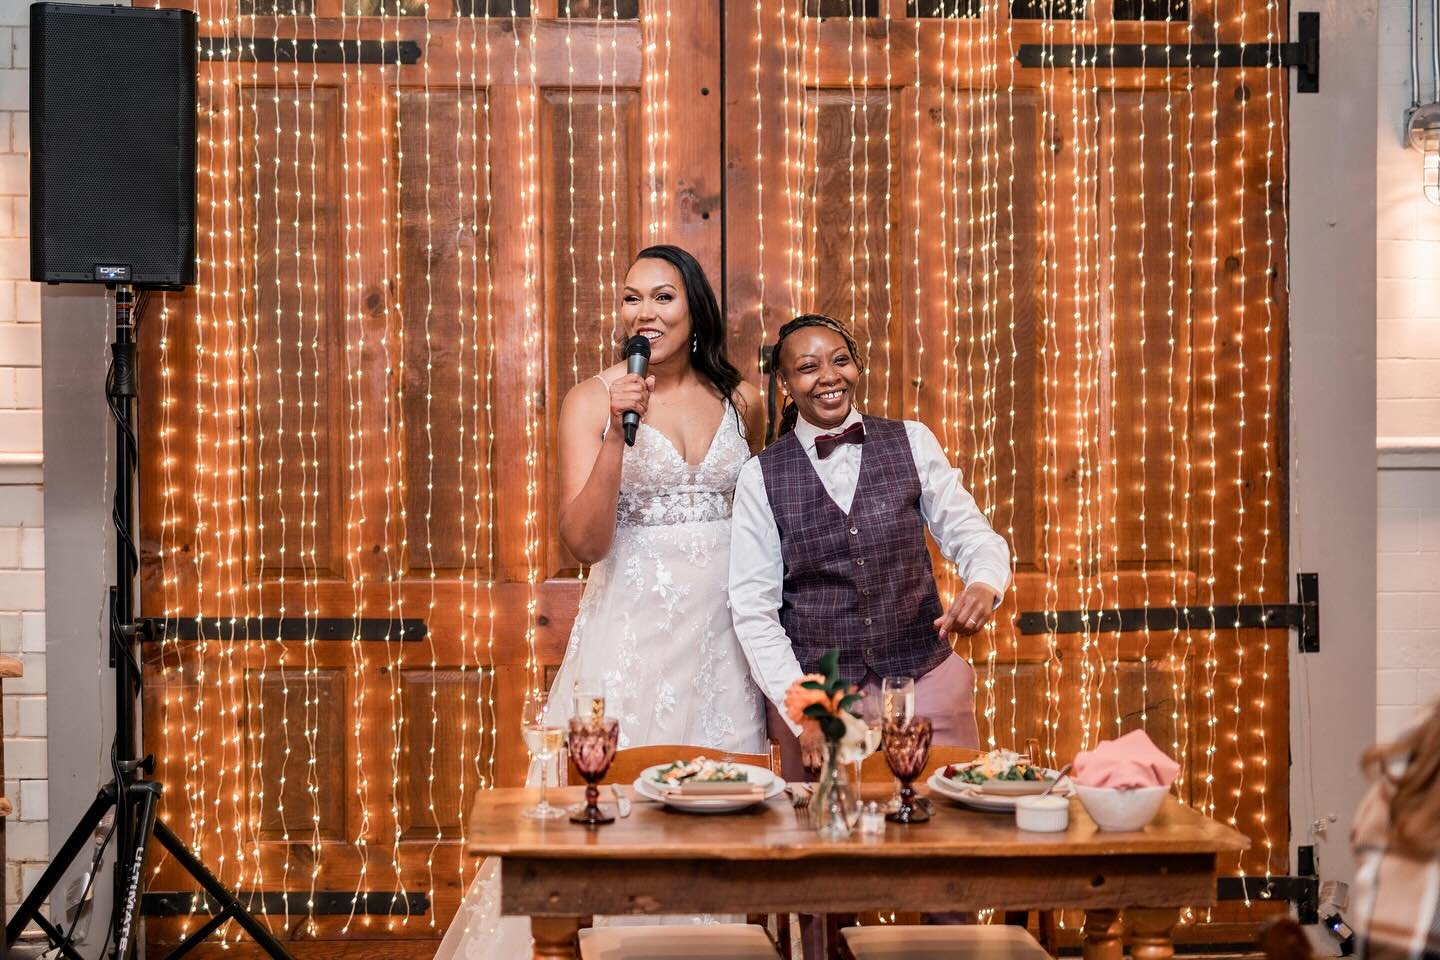 Adding a little ✨ to our day with a look back at Natalie + Robin&rsquo;s magical @firehousechicago wedding back in October! 

BDP Event Producer | Jasmine Vukmarkovic
📍 | @firehousechicago
🥘🍰 | @bigdeliciousplanet
📸 | @xilophotography
💐 | @south